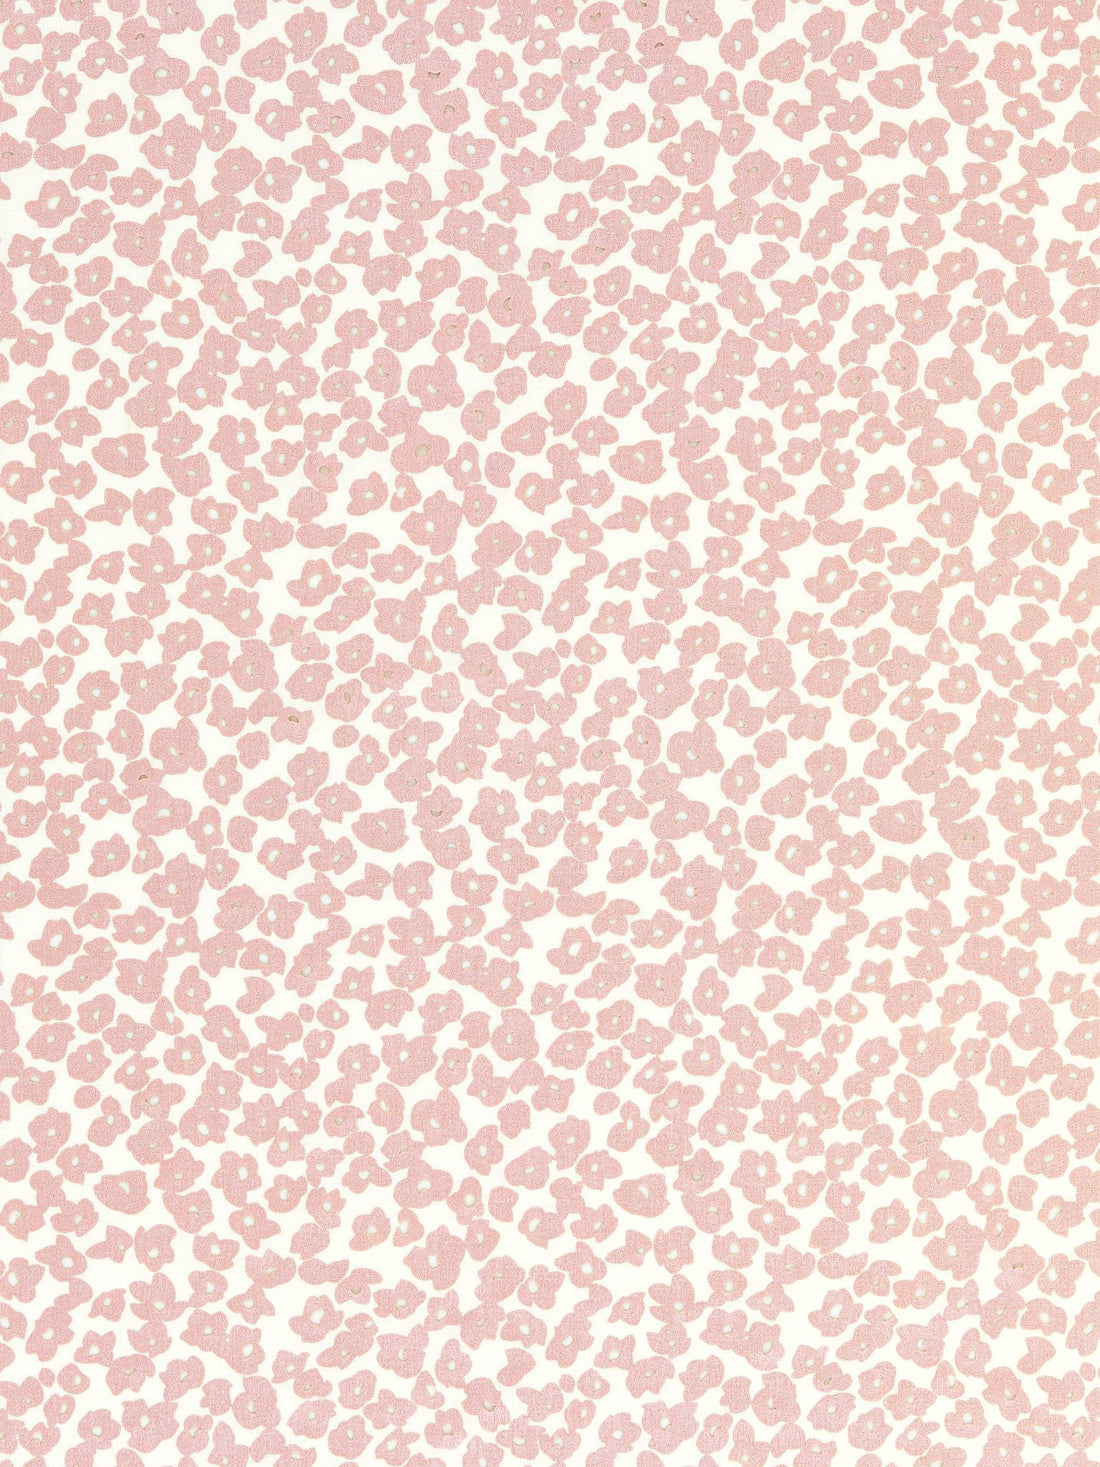 Oleana fabric in petal pink color - pattern number GW 000316619 - by Scalamandre in the Grey Watkins collection